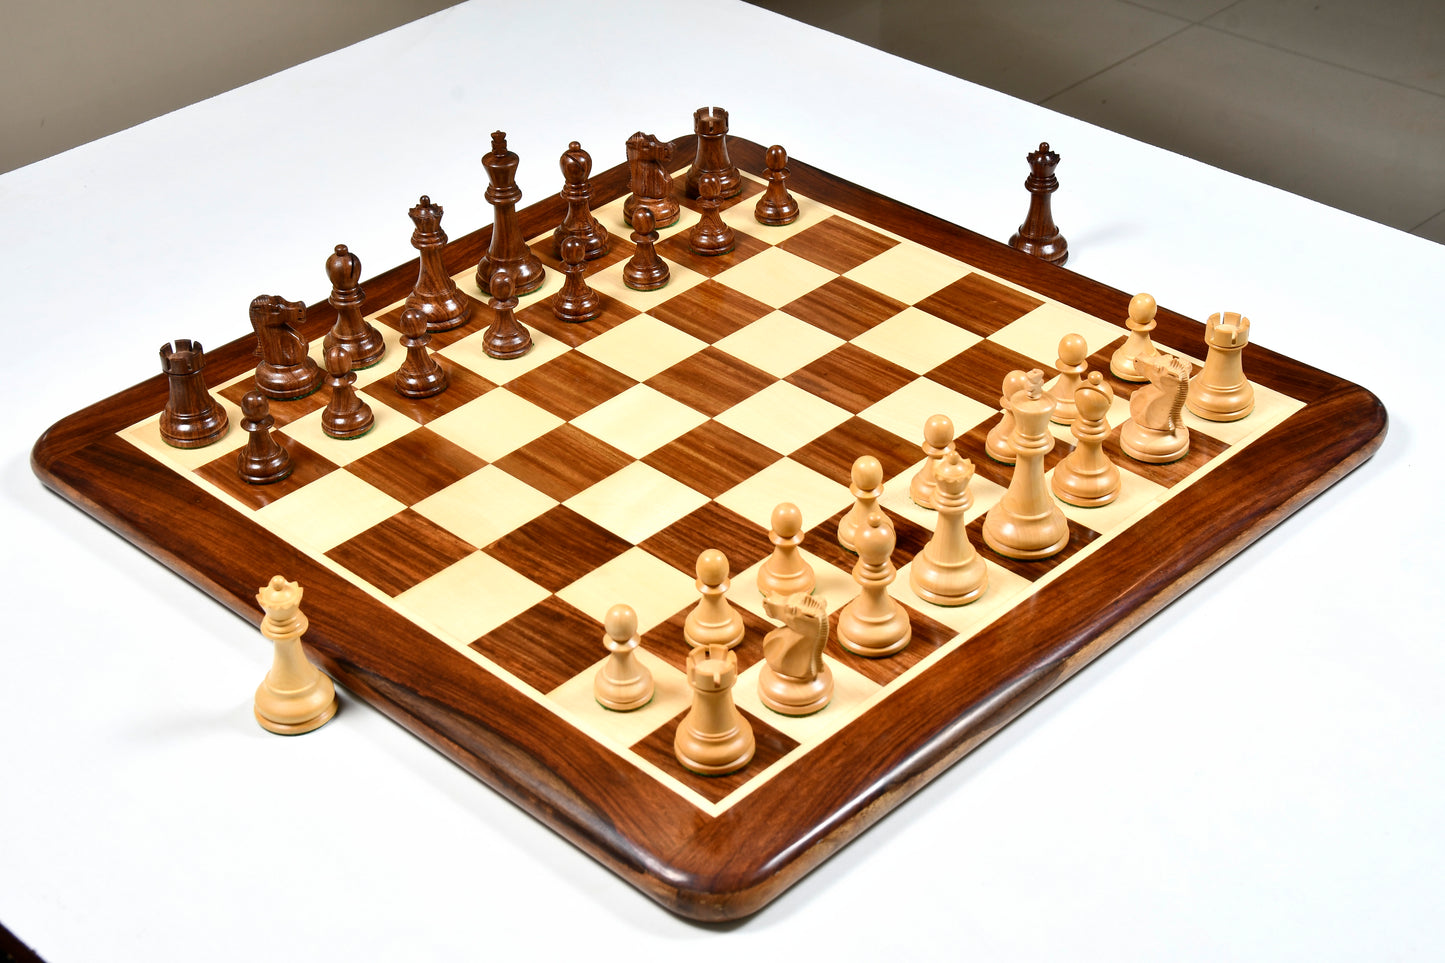 Combo of 1972 Reproduced Fischer-Spassky Staunton Pattern Chess Set V2.0 & Wooden Chess Board in Sheesham Wood & Boxwood - 3.75" King